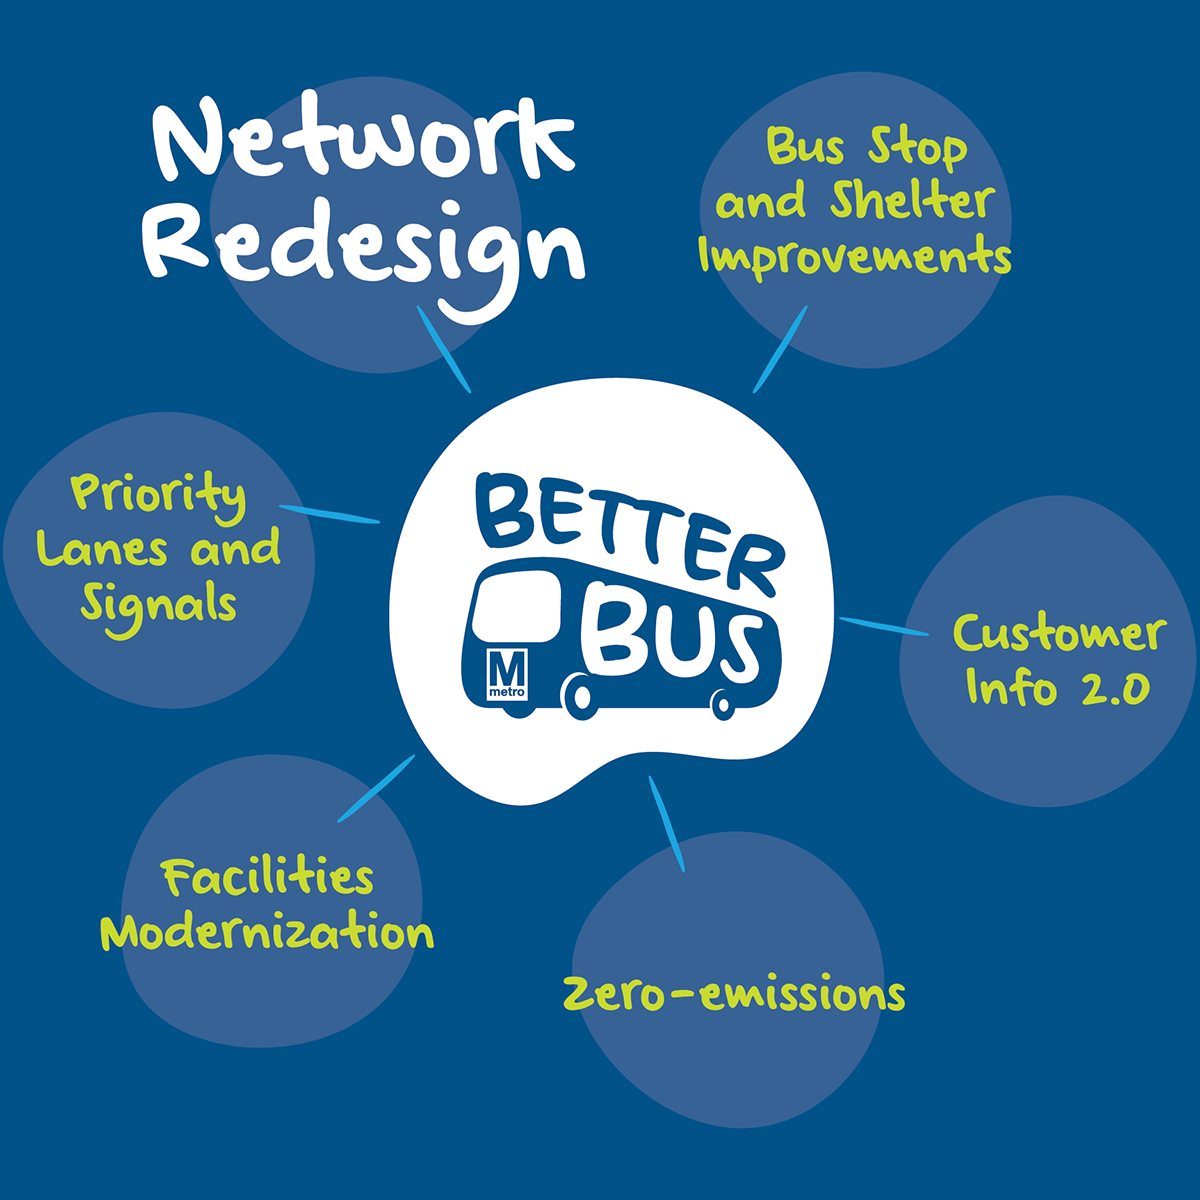 The Better Bus includes a network redesign, Bus Stop and Shelter Improvements, Customer Info 2.0, electrification, facilities modernization, and priority lanes and signals.